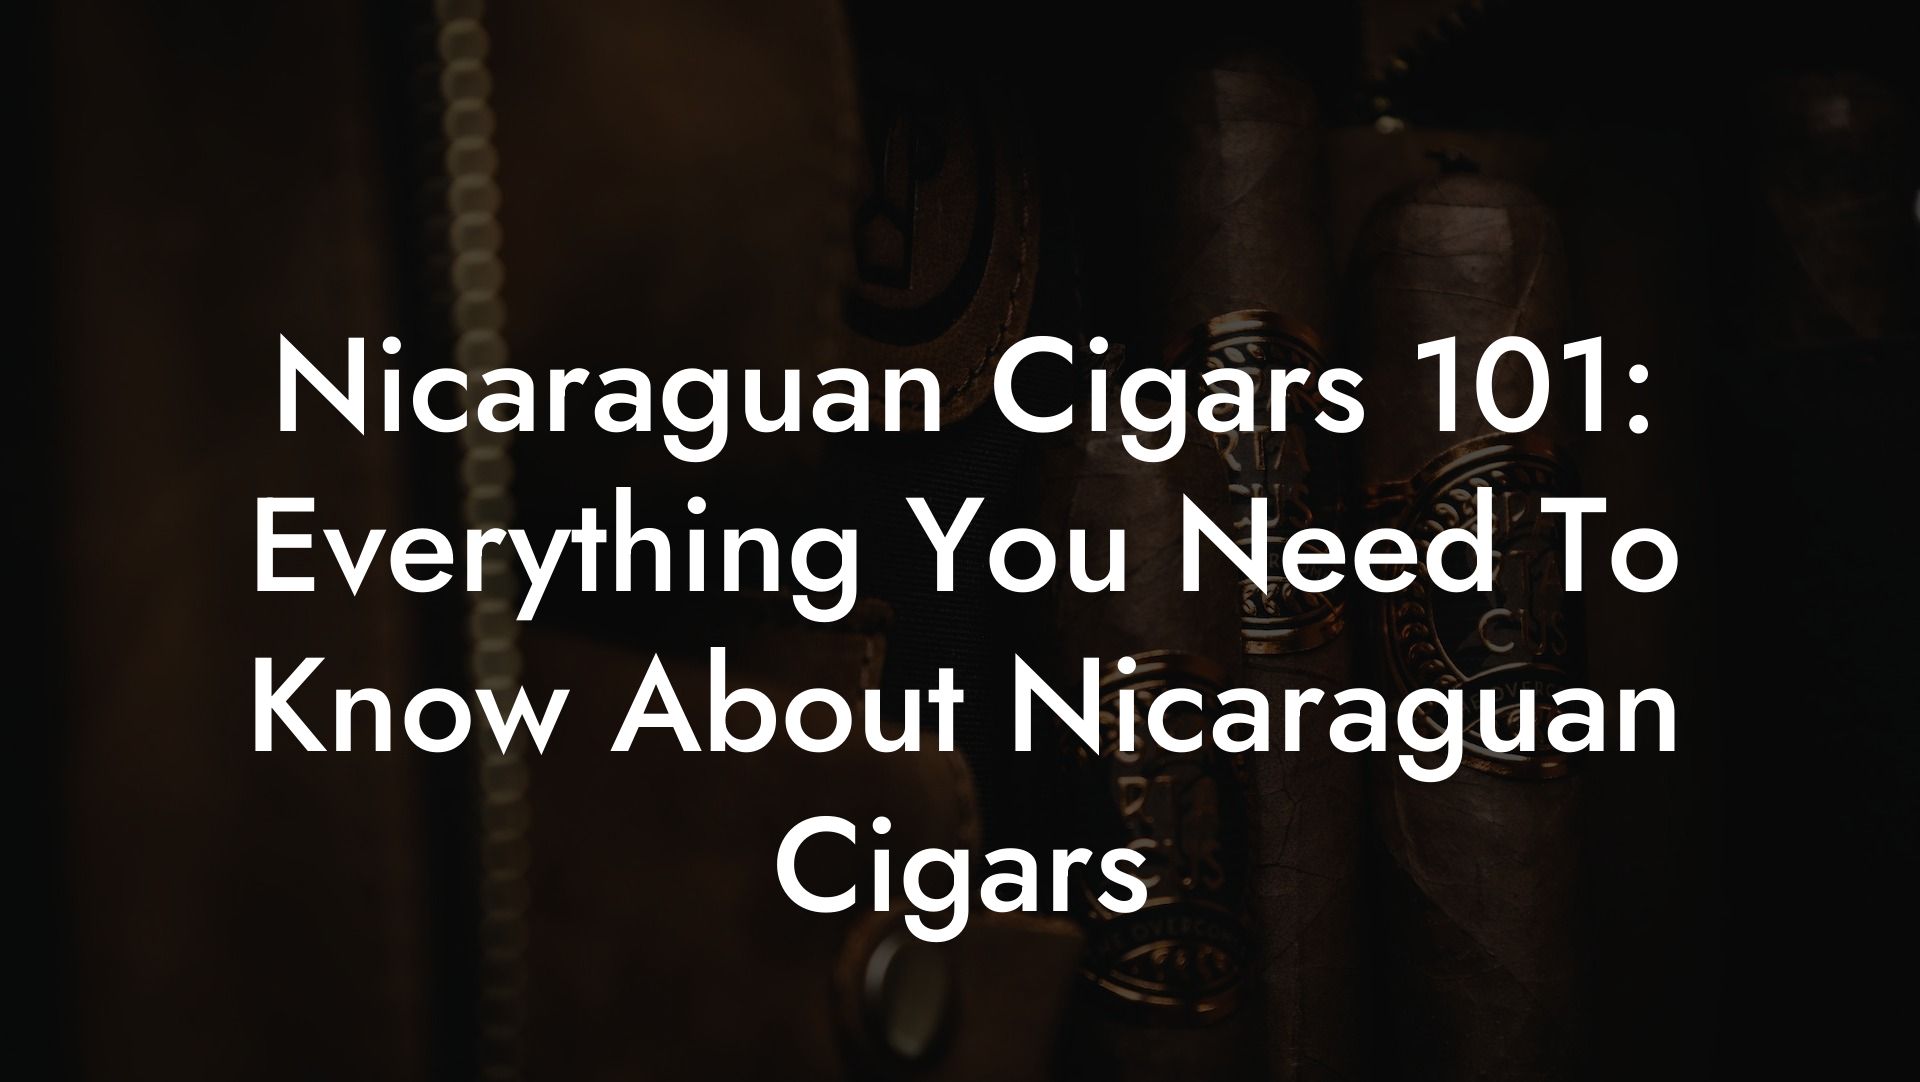 Nicaraguan Cigars 101: Everything You Need To Know About Nicaraguan Cigars